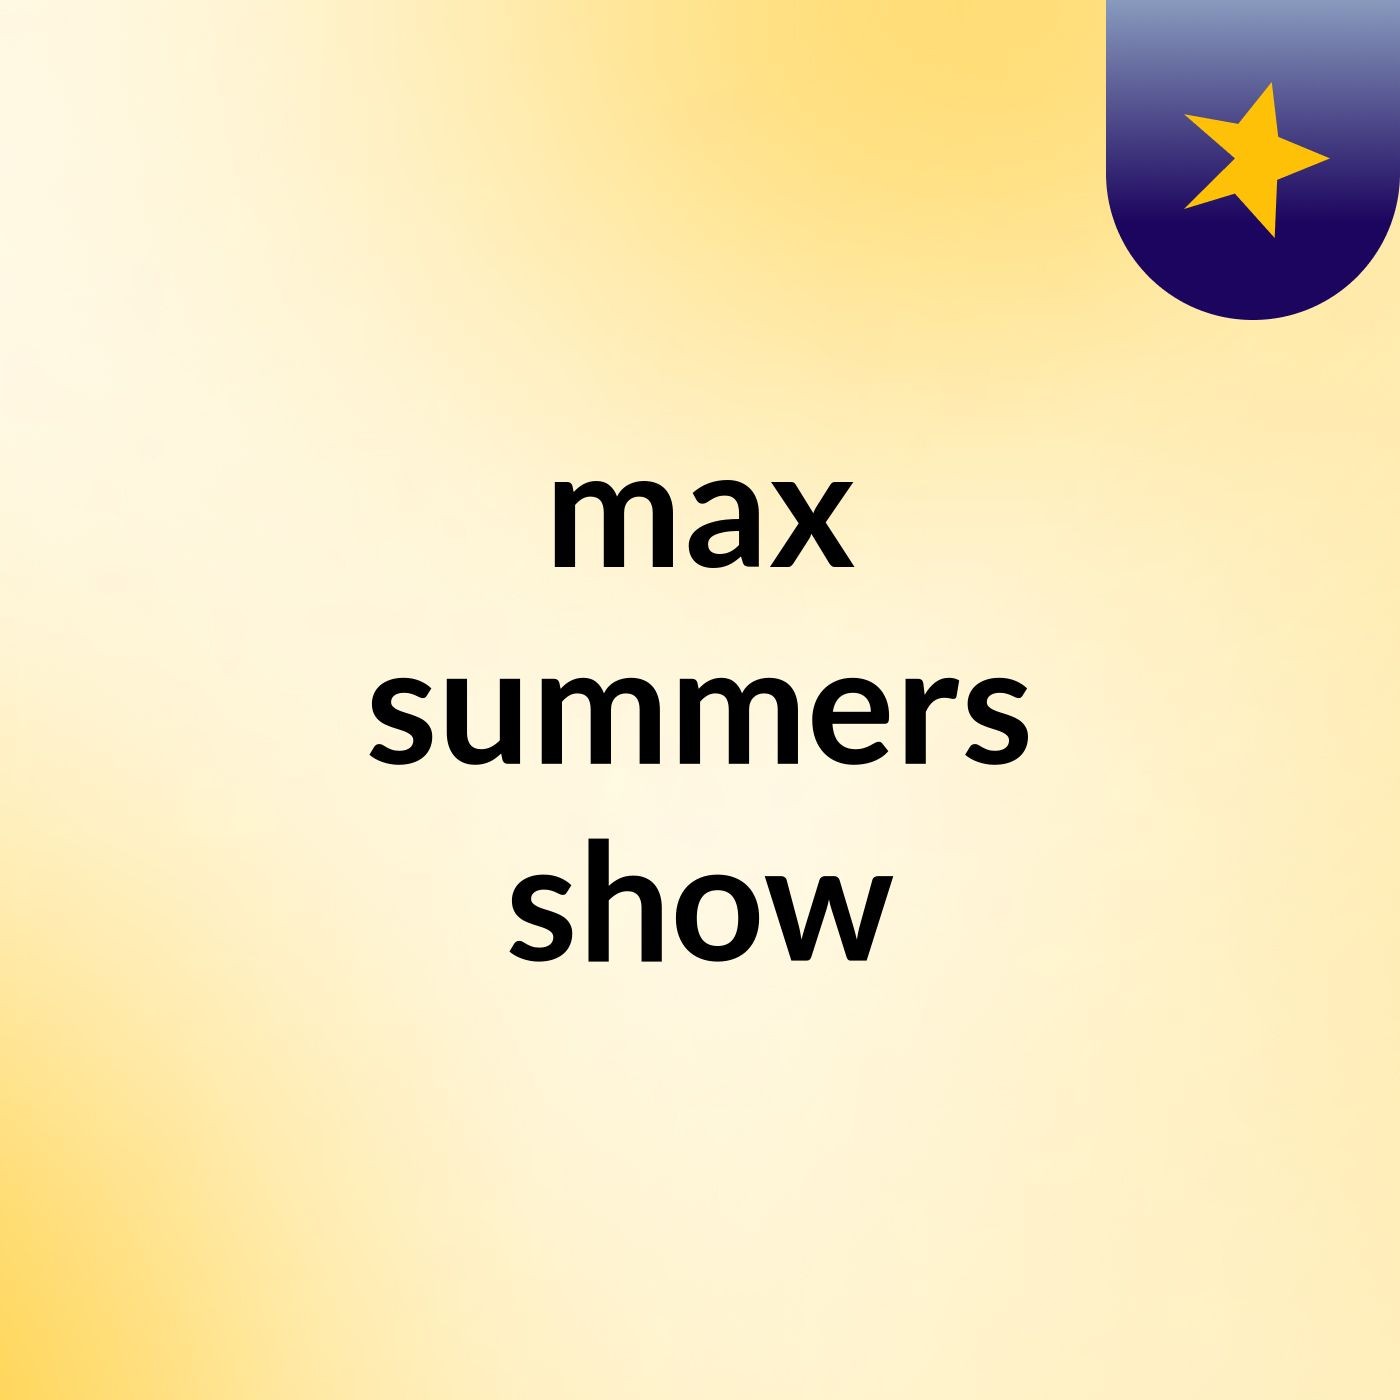 max summers show